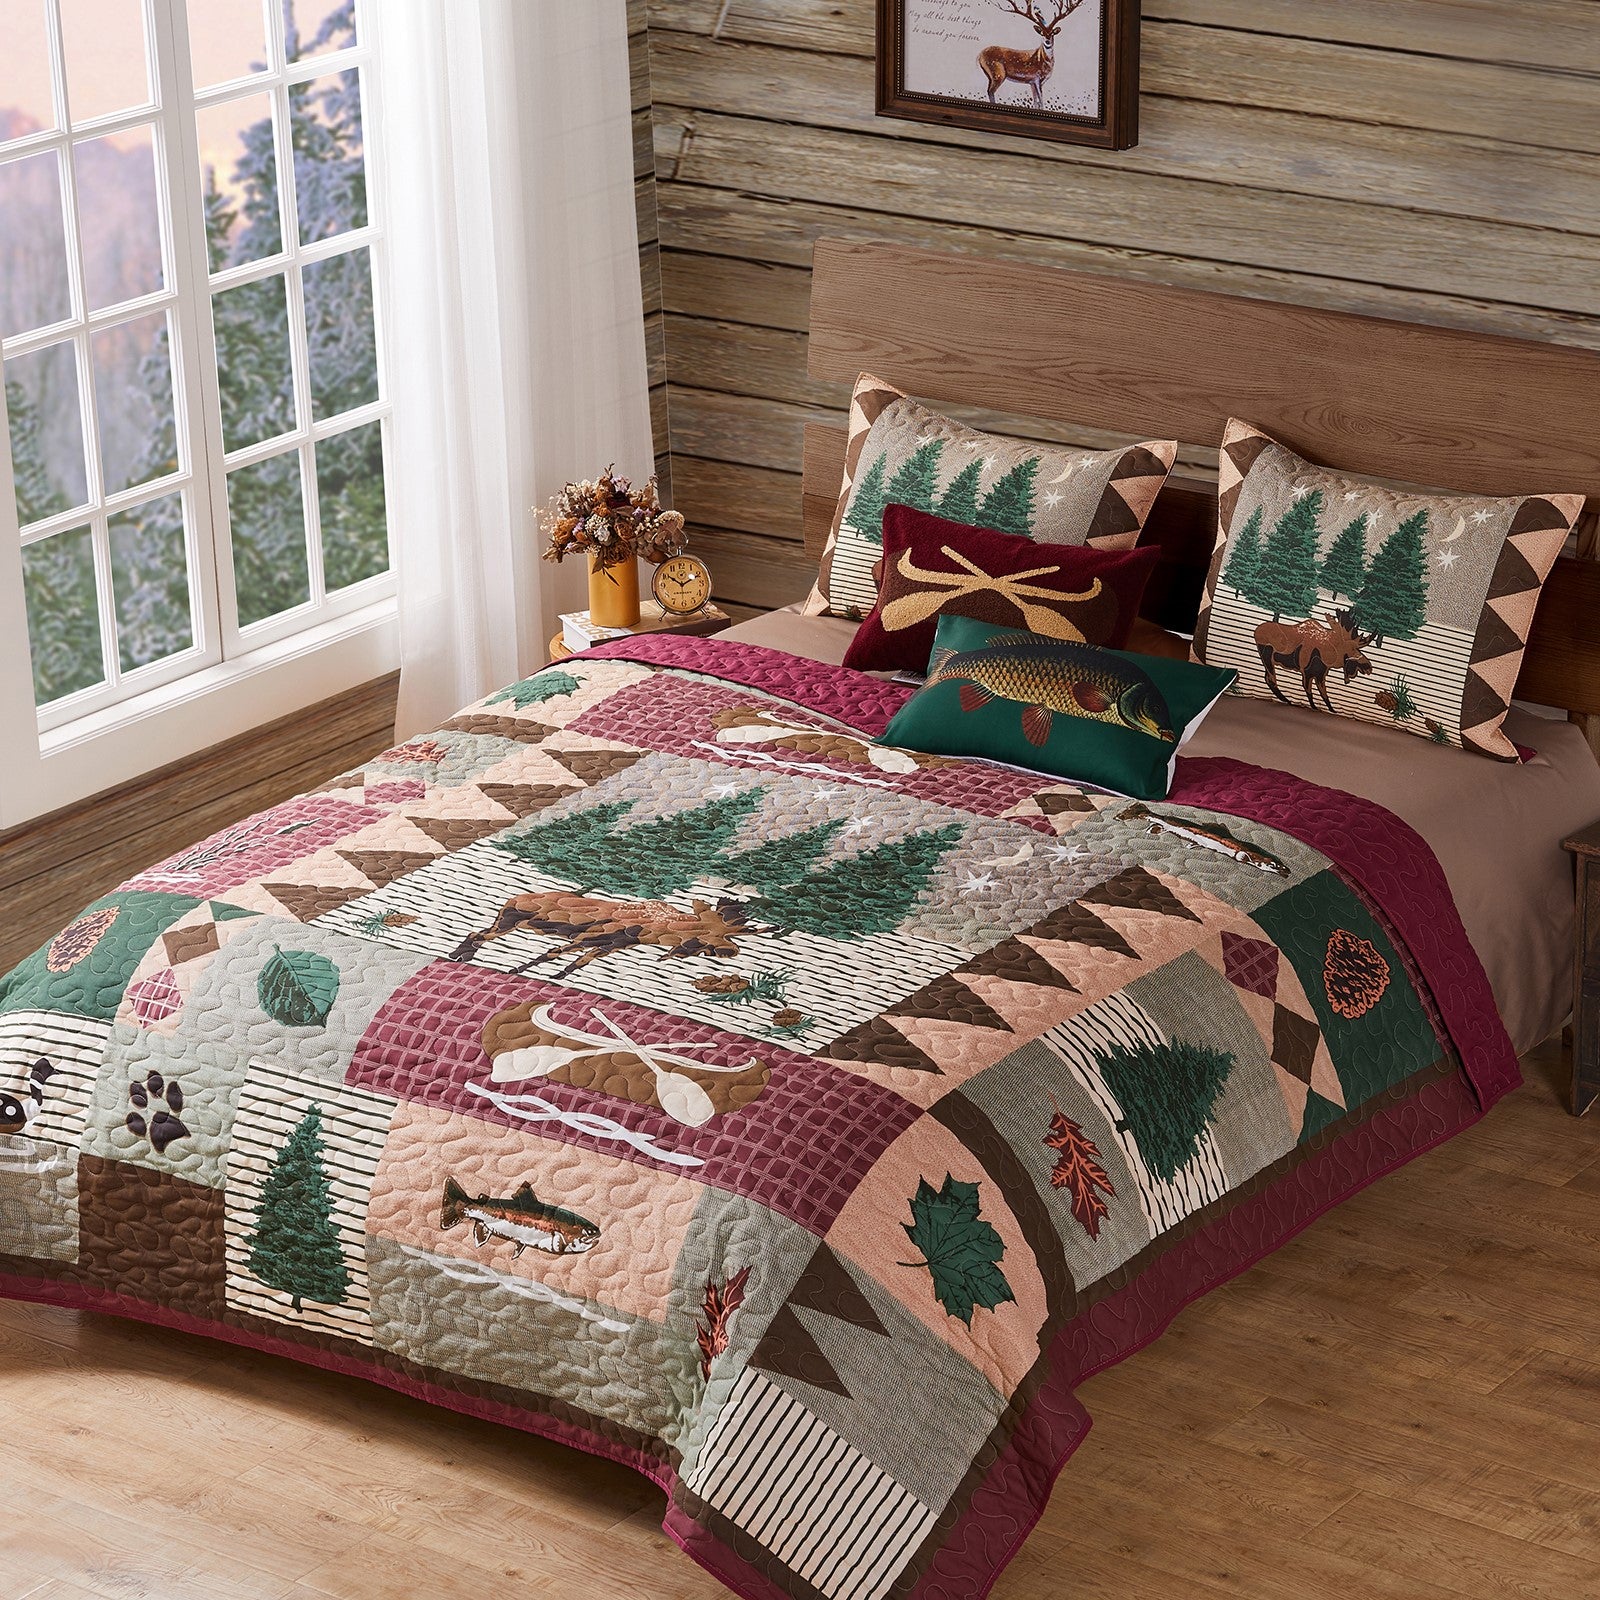 Greenland Home Fashion Moose Lodge Quilt And Pillow Sham Set - 3 - Piece - Full/Queen 90x90", Multi - Full/Queen